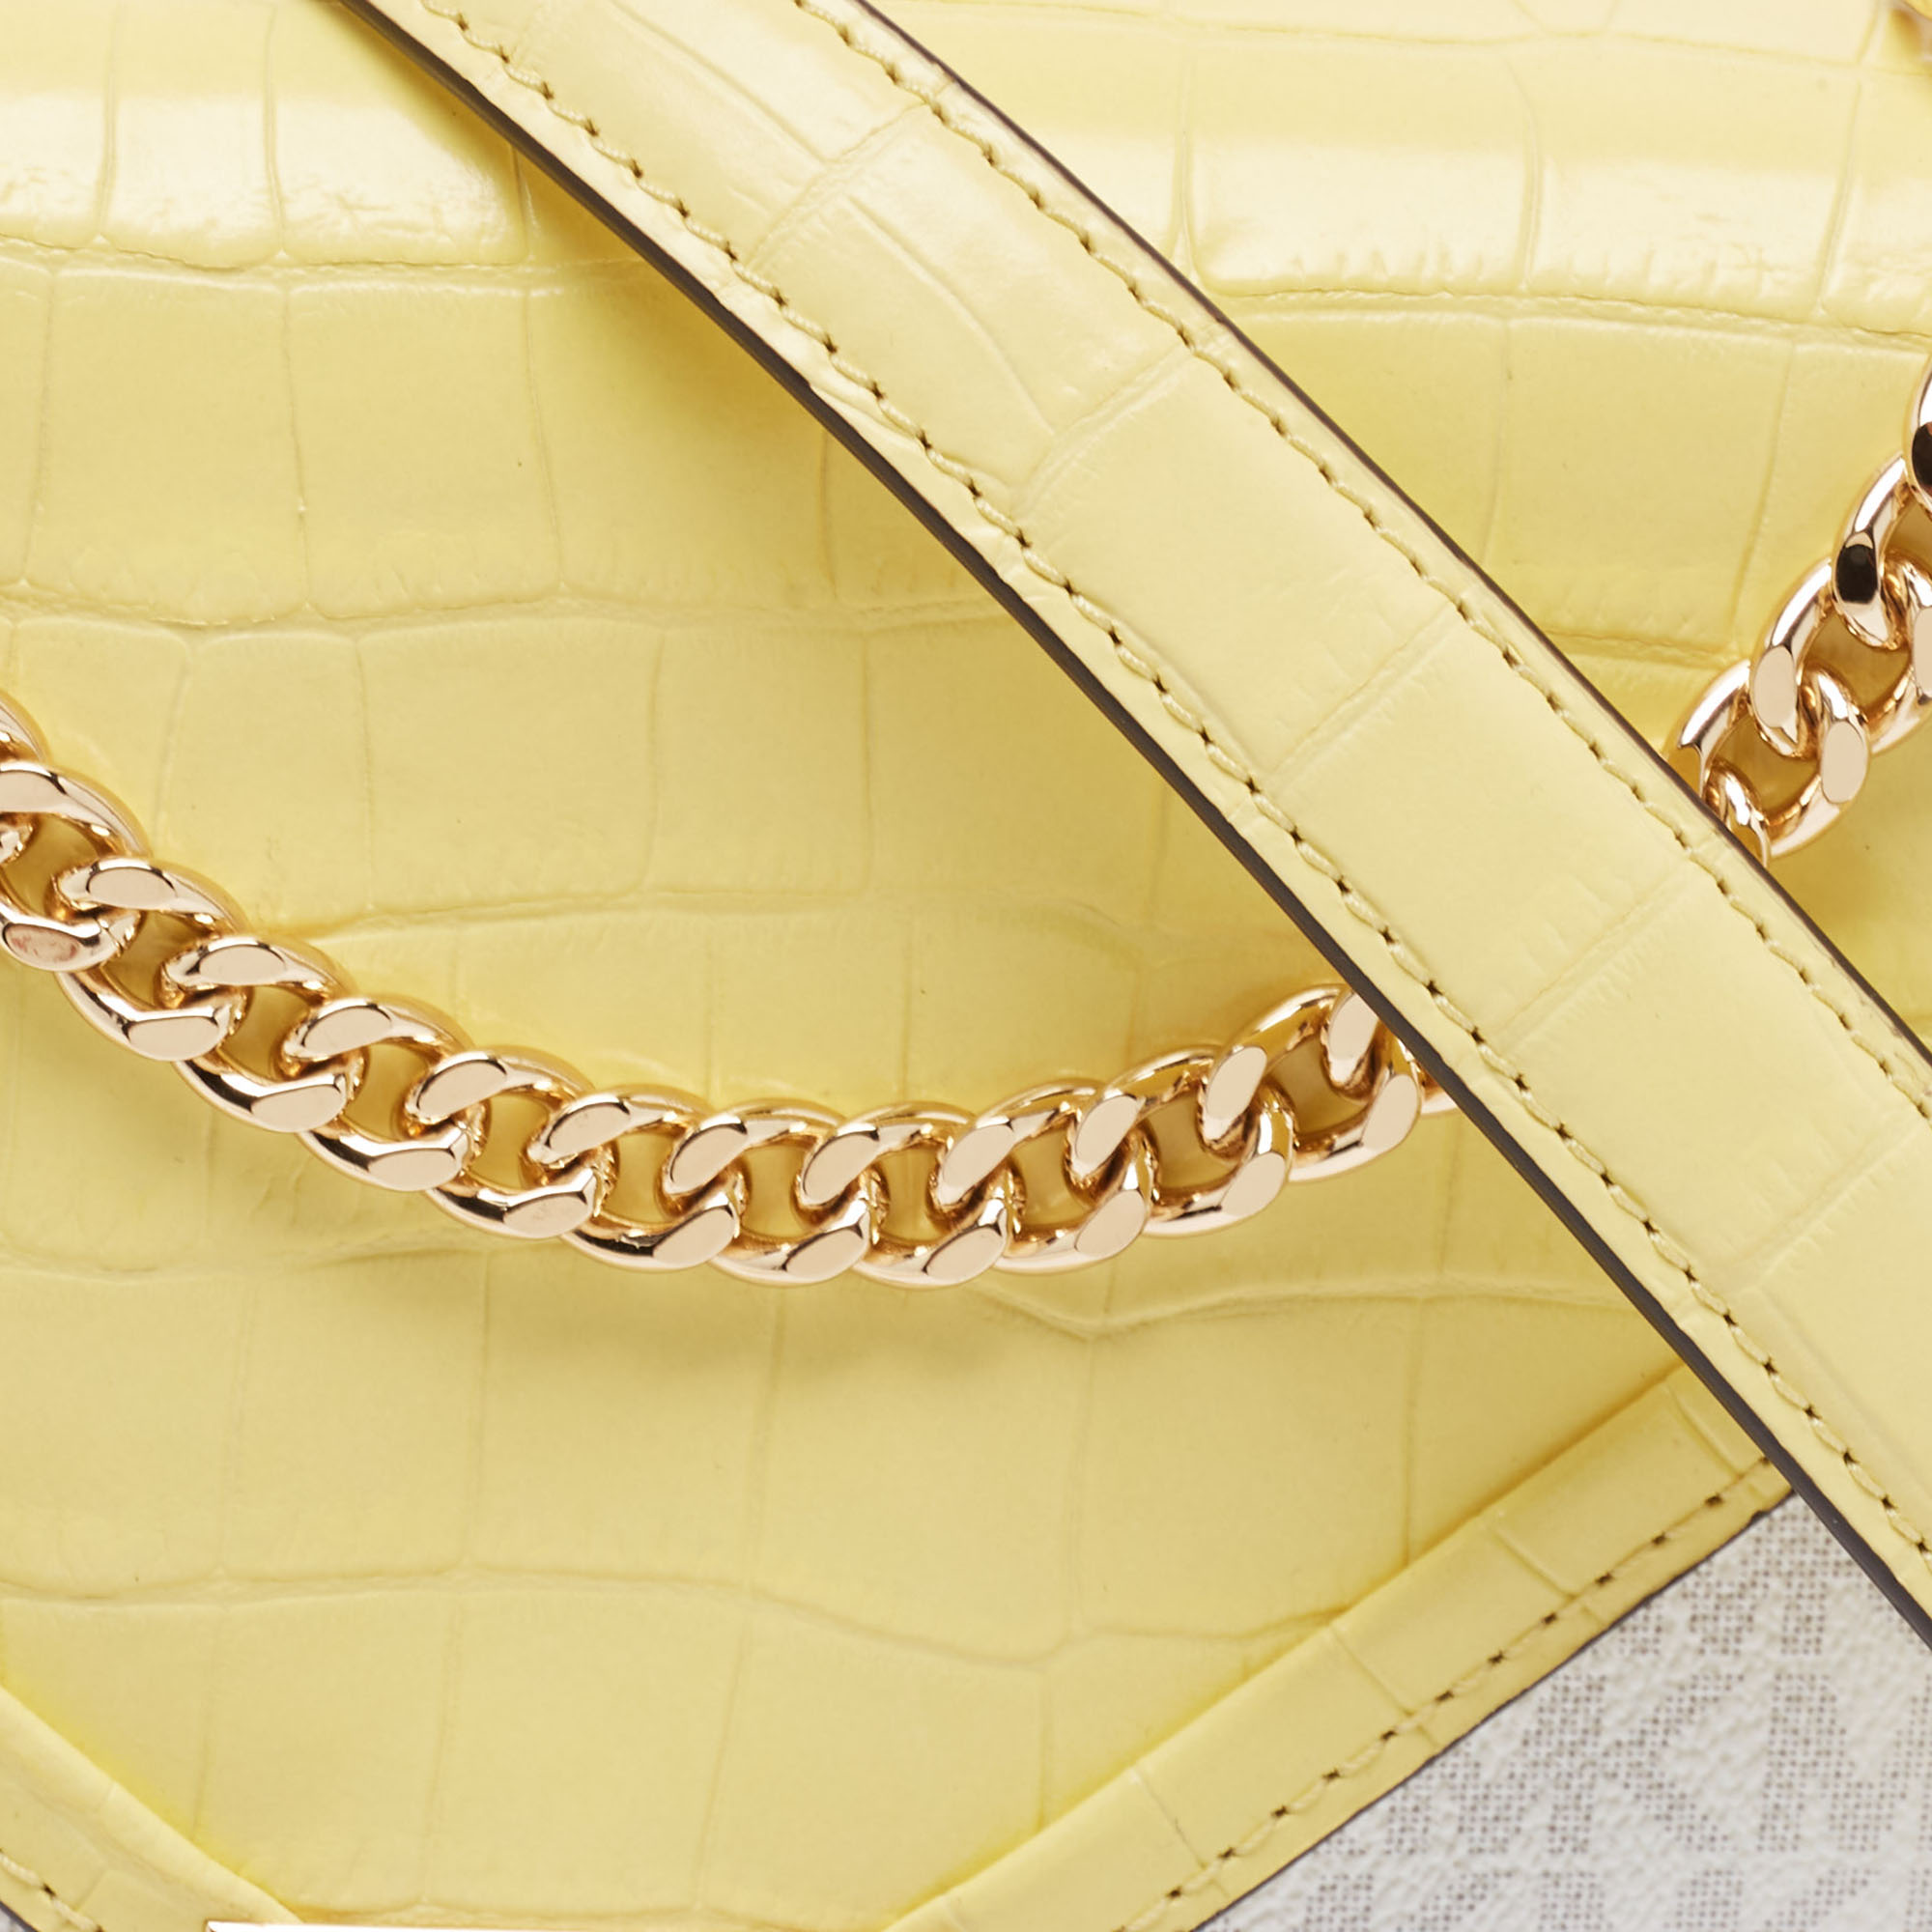 Michael Kors Yellow/White Coated Canvas And Croc Embossed Leather Large Whitney Shoulder Bag